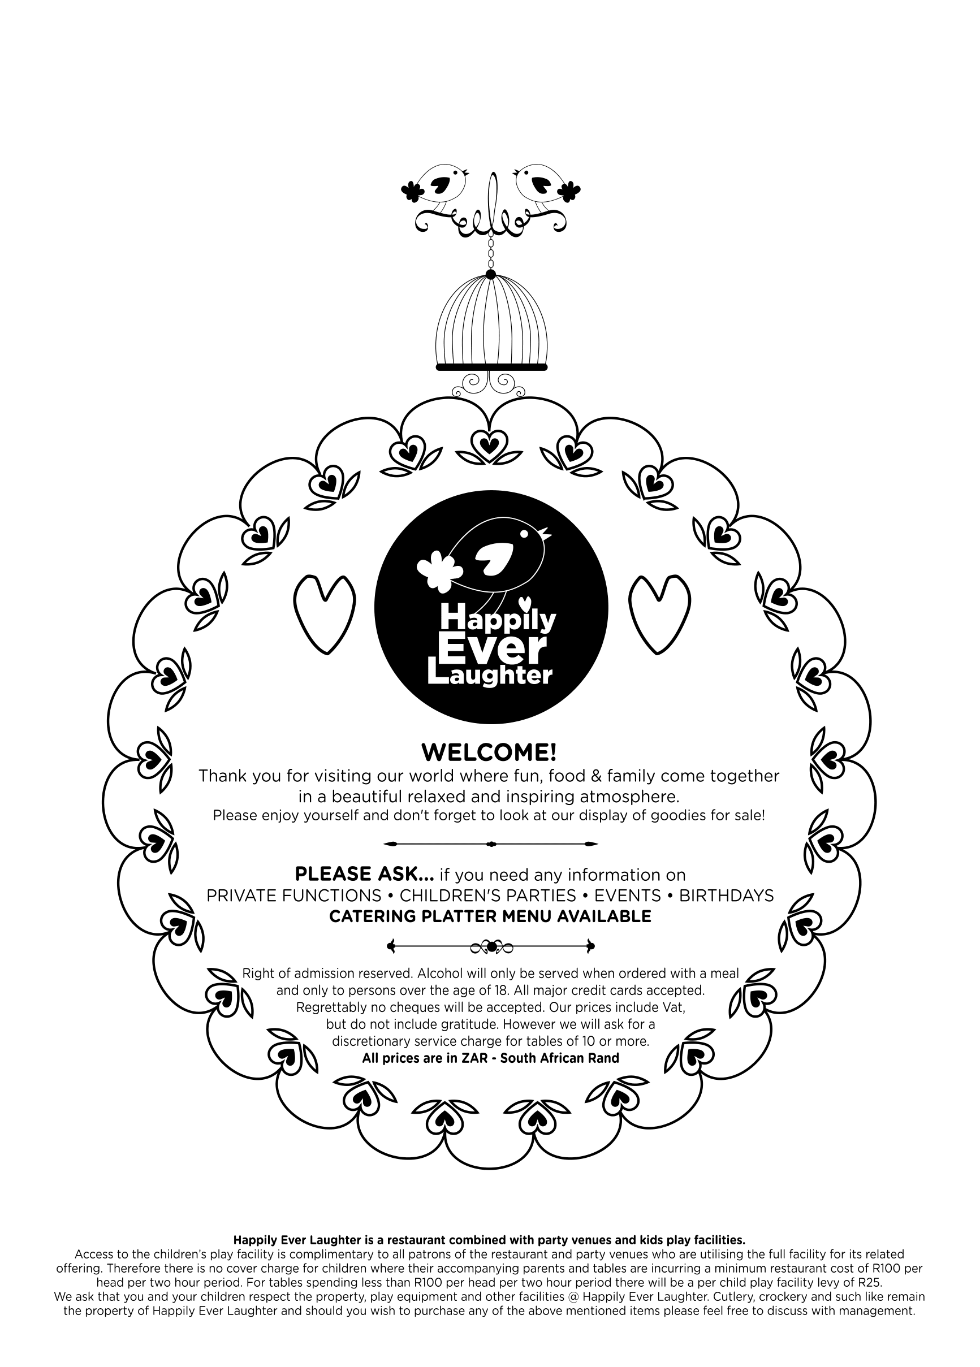 Happily Ever Laughter_Restaurant_Menu_Welcome